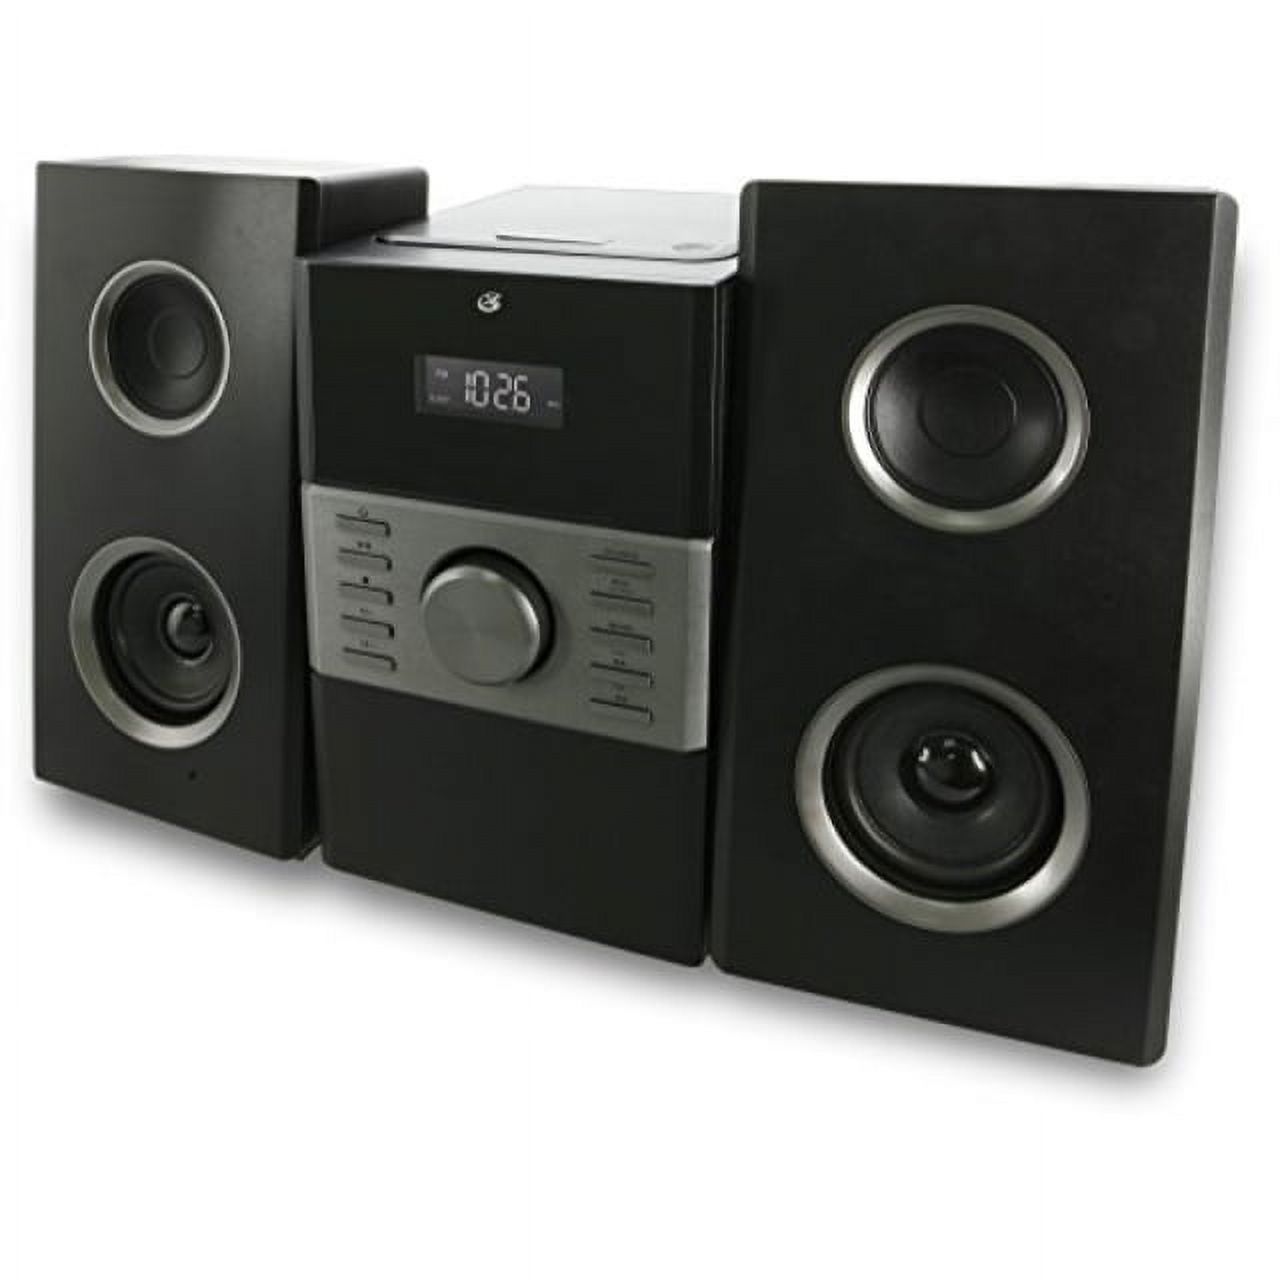 GPX hc425b Stereo Home Music System with CD Player & AM/FM Tuner, Remote Control - image 1 of 3